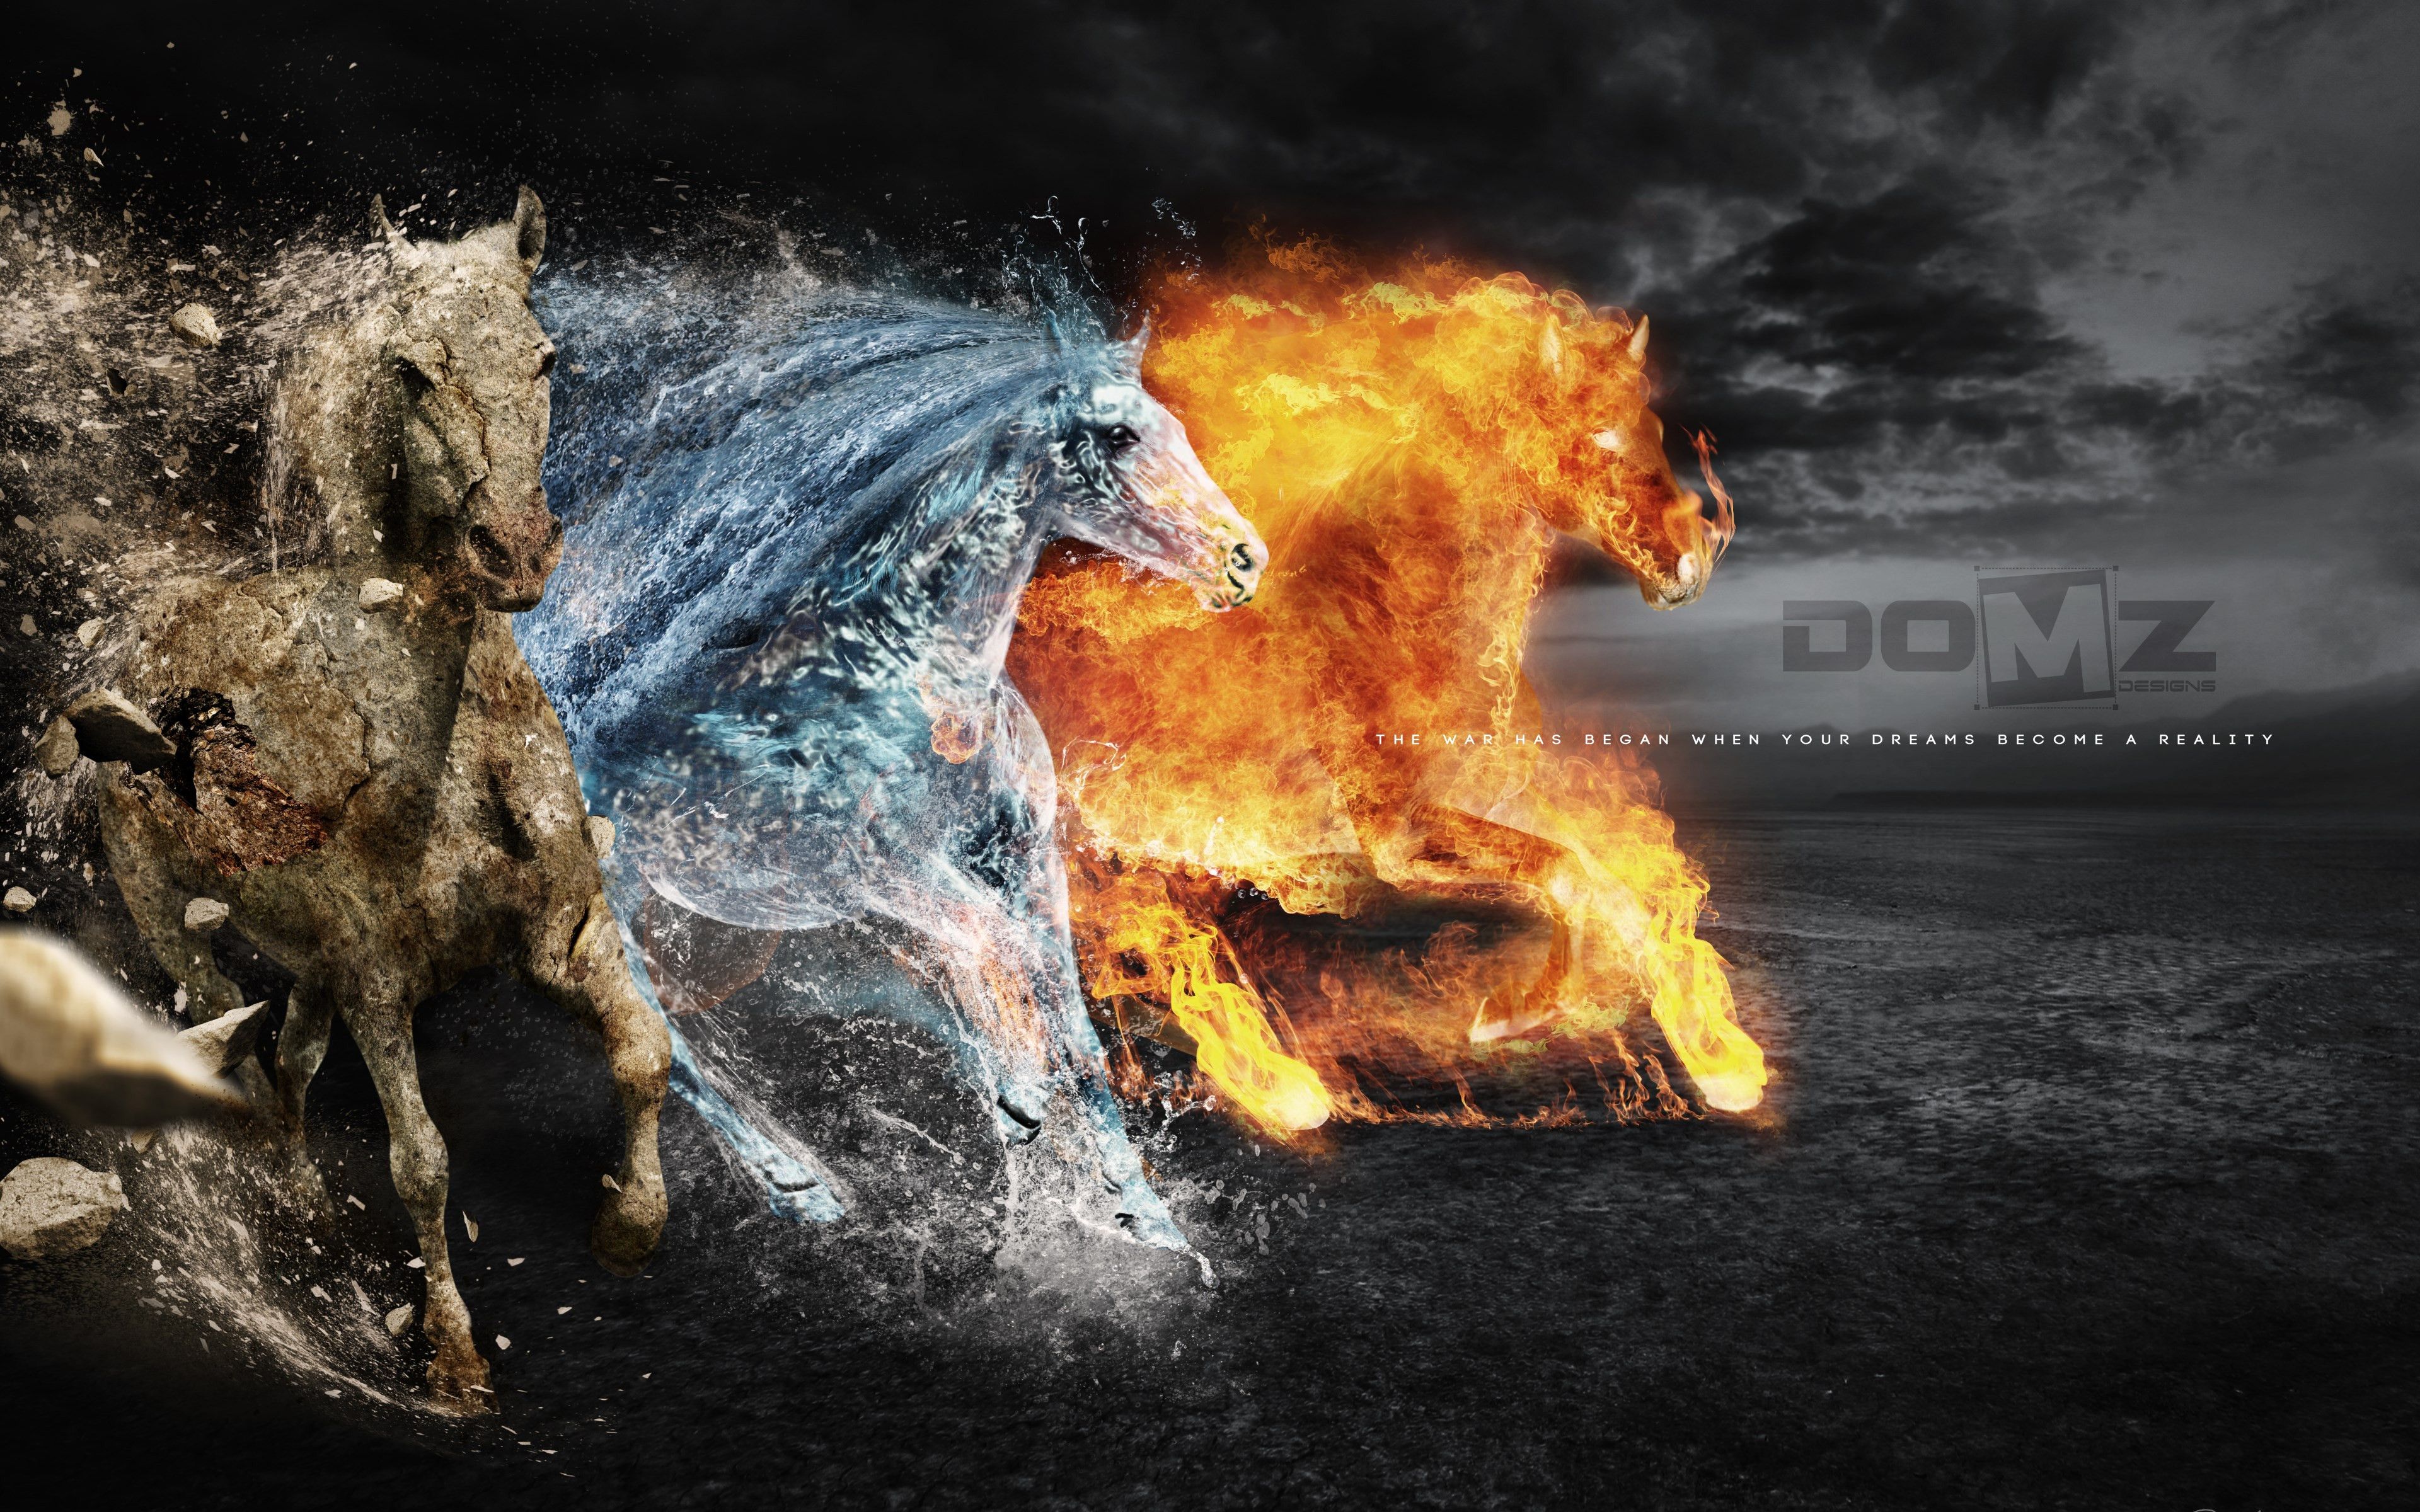 Download wallpaper: Horses of: Earth, Fire and Water 3840x2400